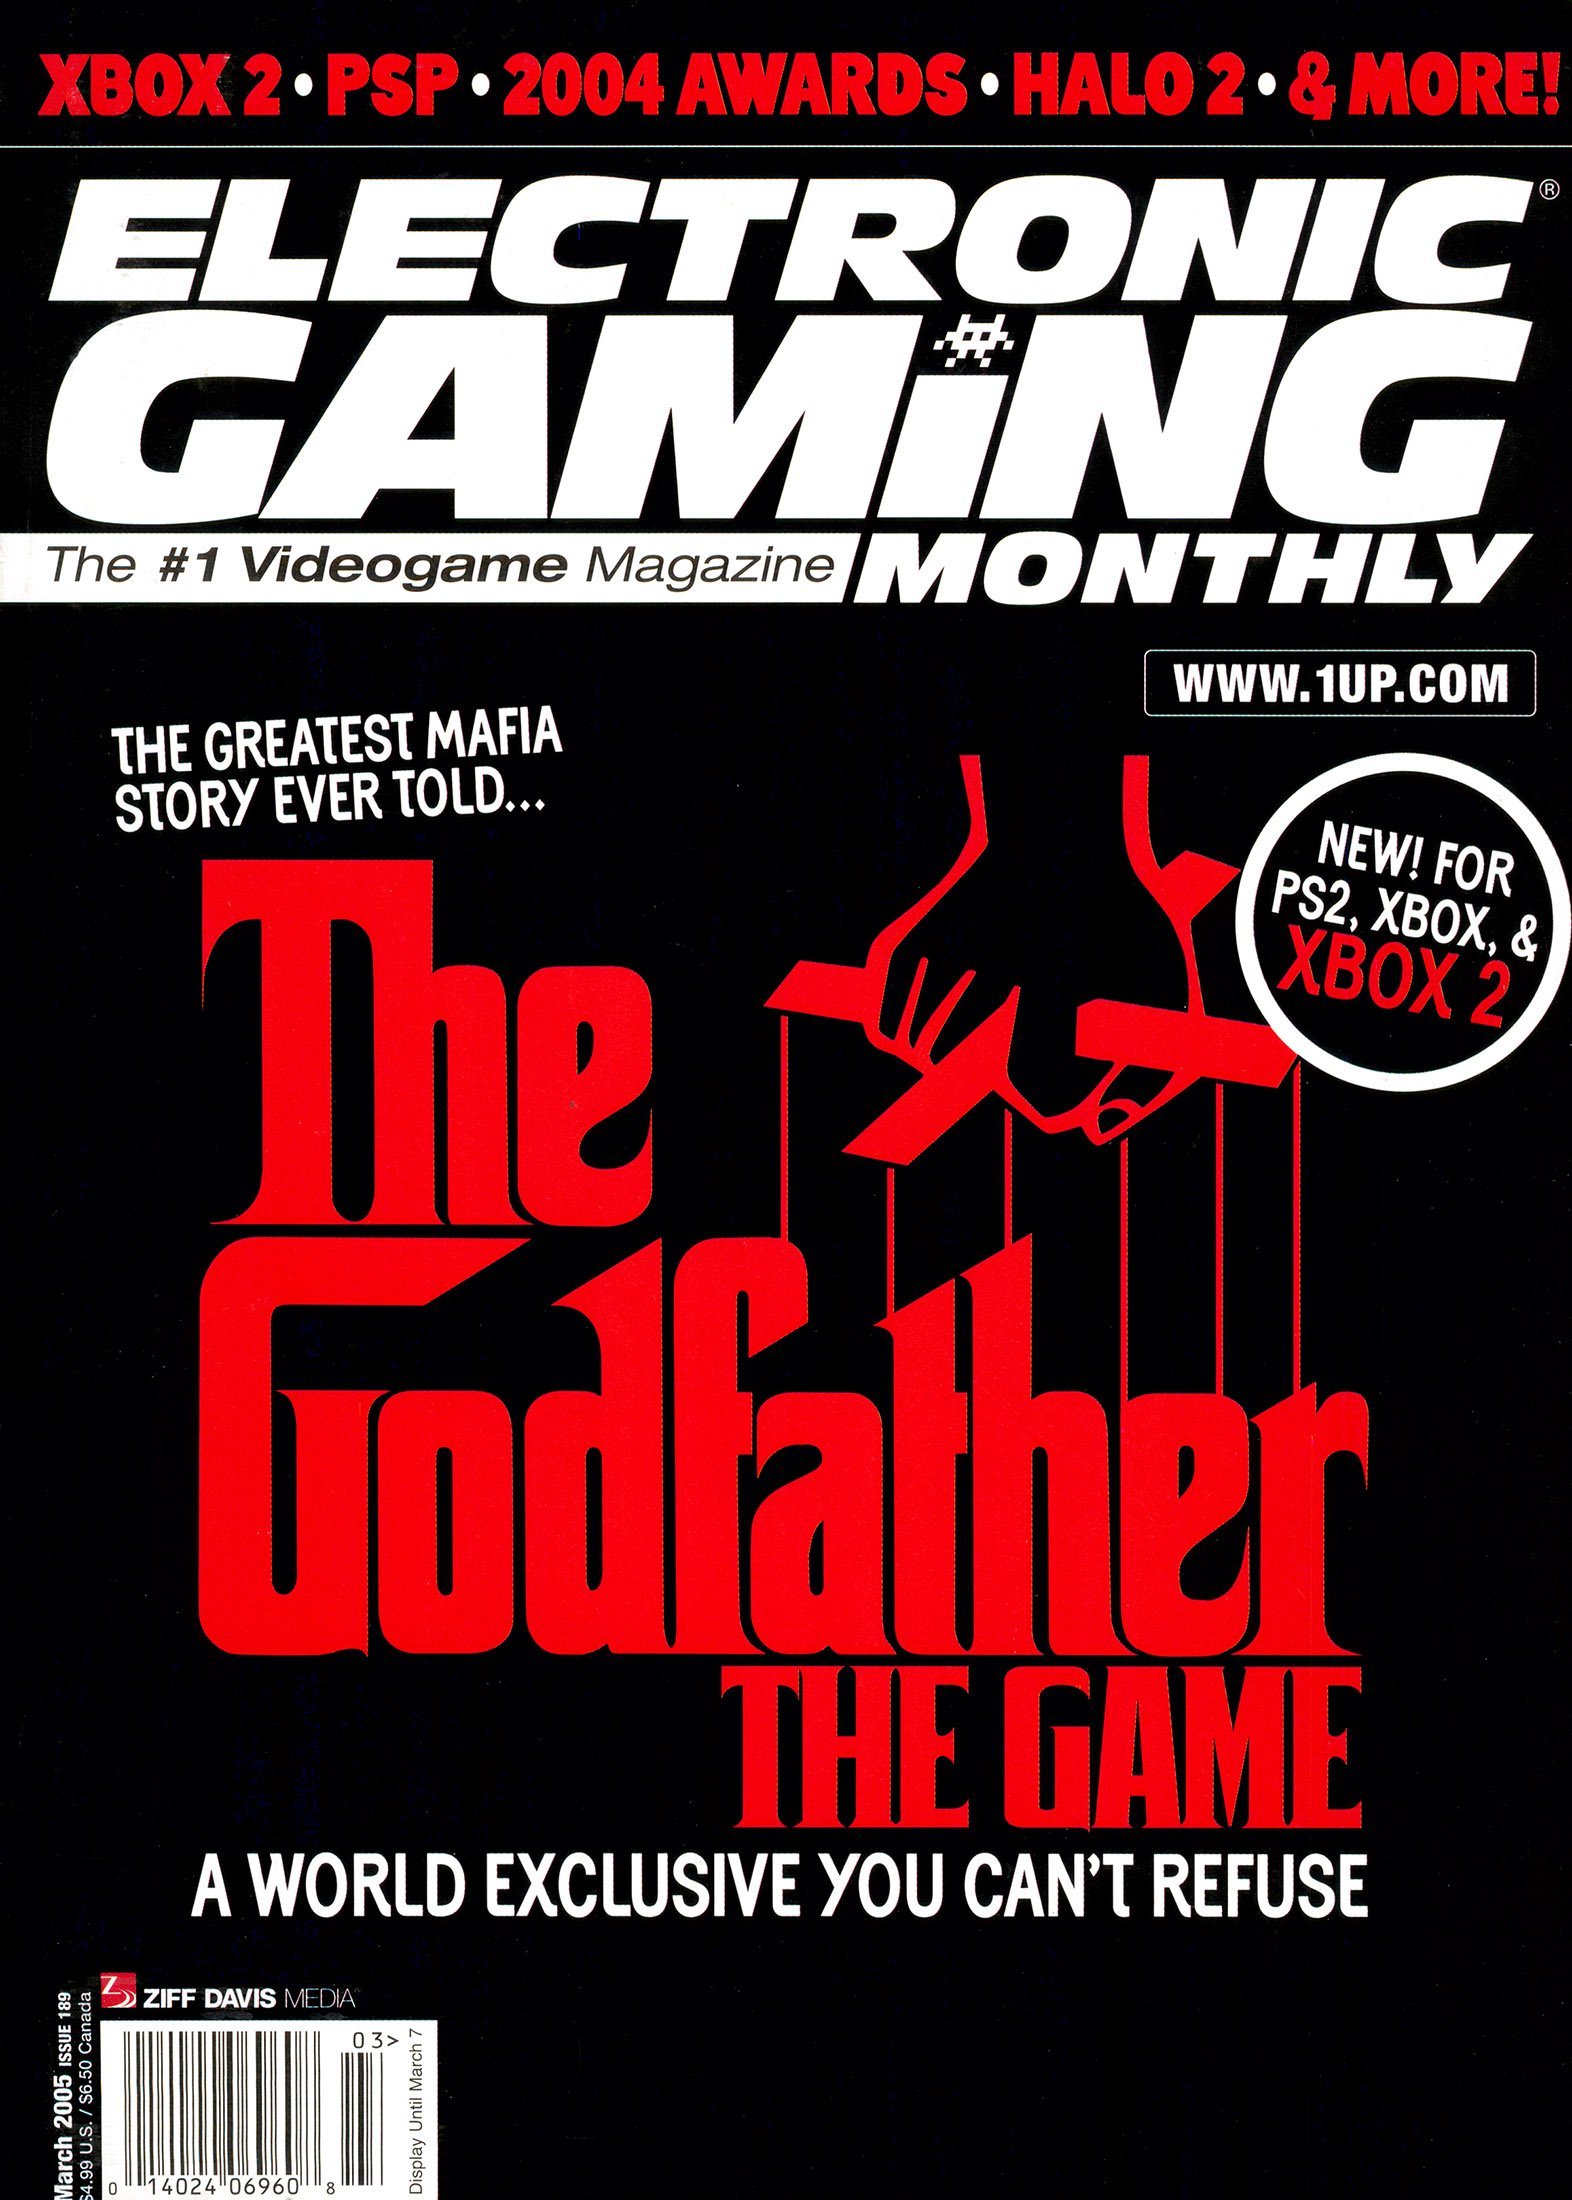 Electronic Gaming Monthly Issue 189 (March 2005)